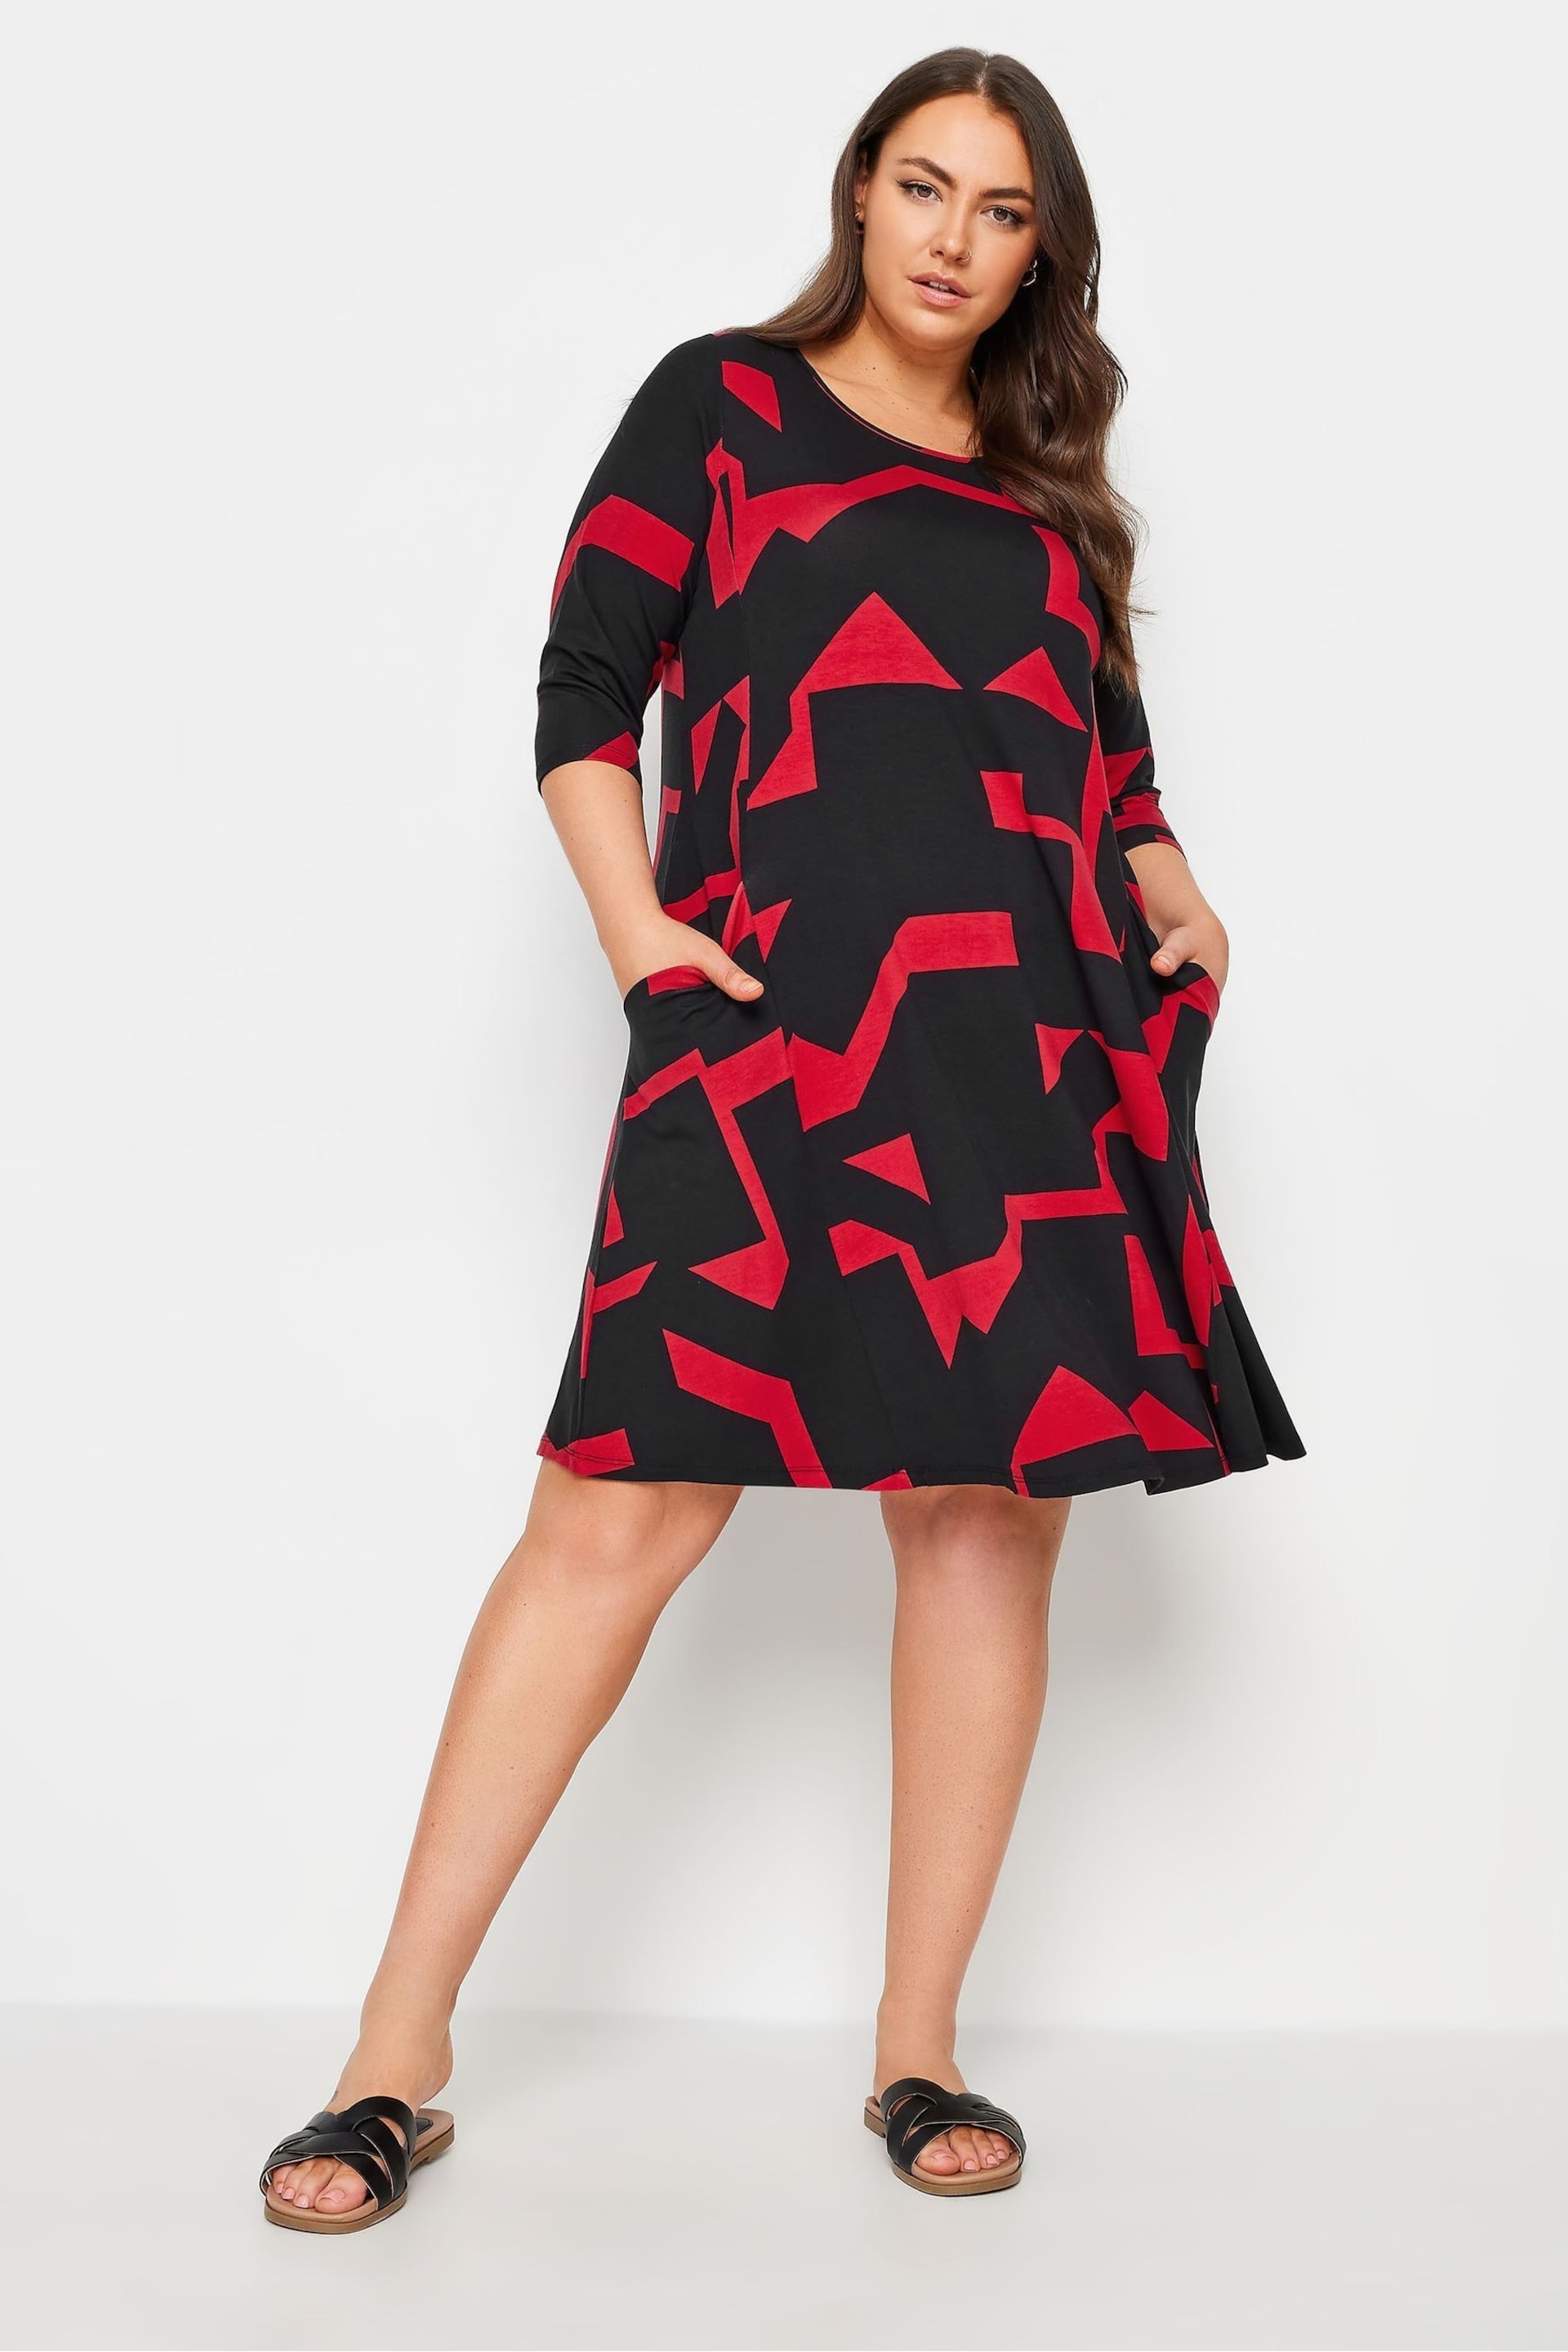 Yours Curve Black Abstract Print Pocket Dress - Image 1 of 5